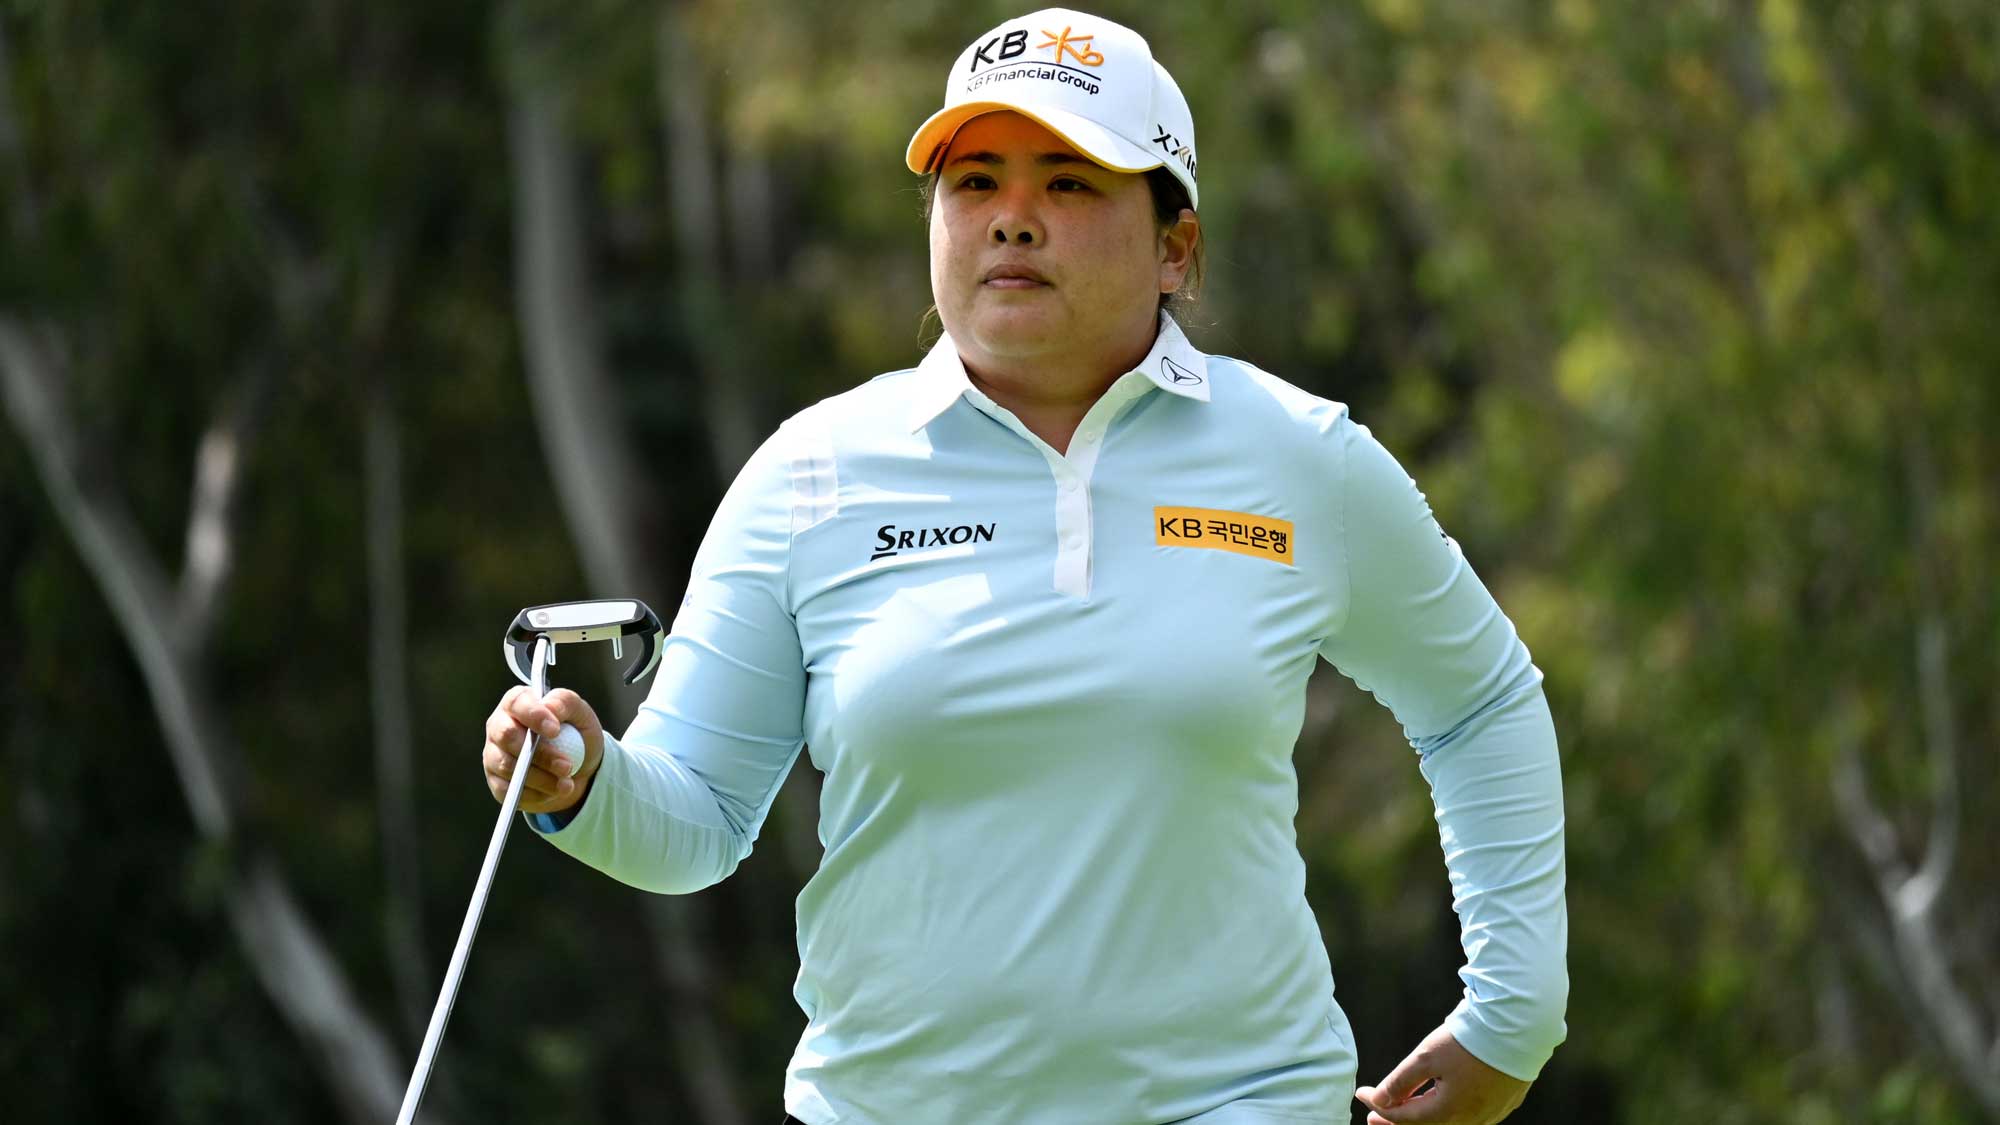 Inbee Park of South Korea puts on the 4th green during the Round Two of the KIA Classic at the Aviara Golf Club on March 26, 2021 in Carlsbad, California.